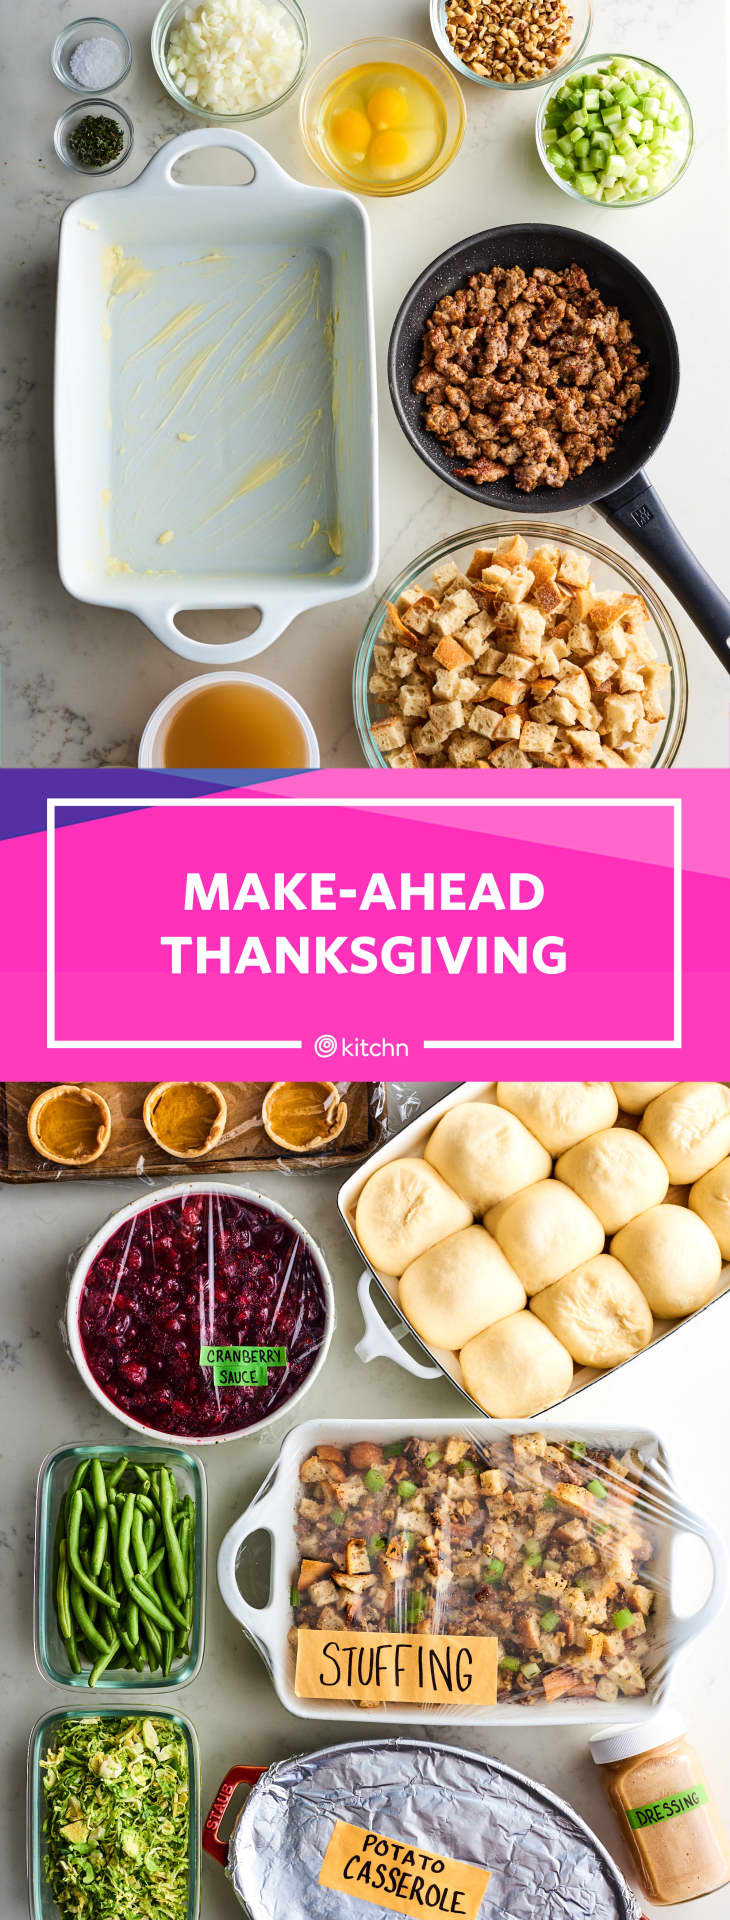 How to Make Ahead a Whole Thanksgiving Meal in 3 Hours | The Kitchn